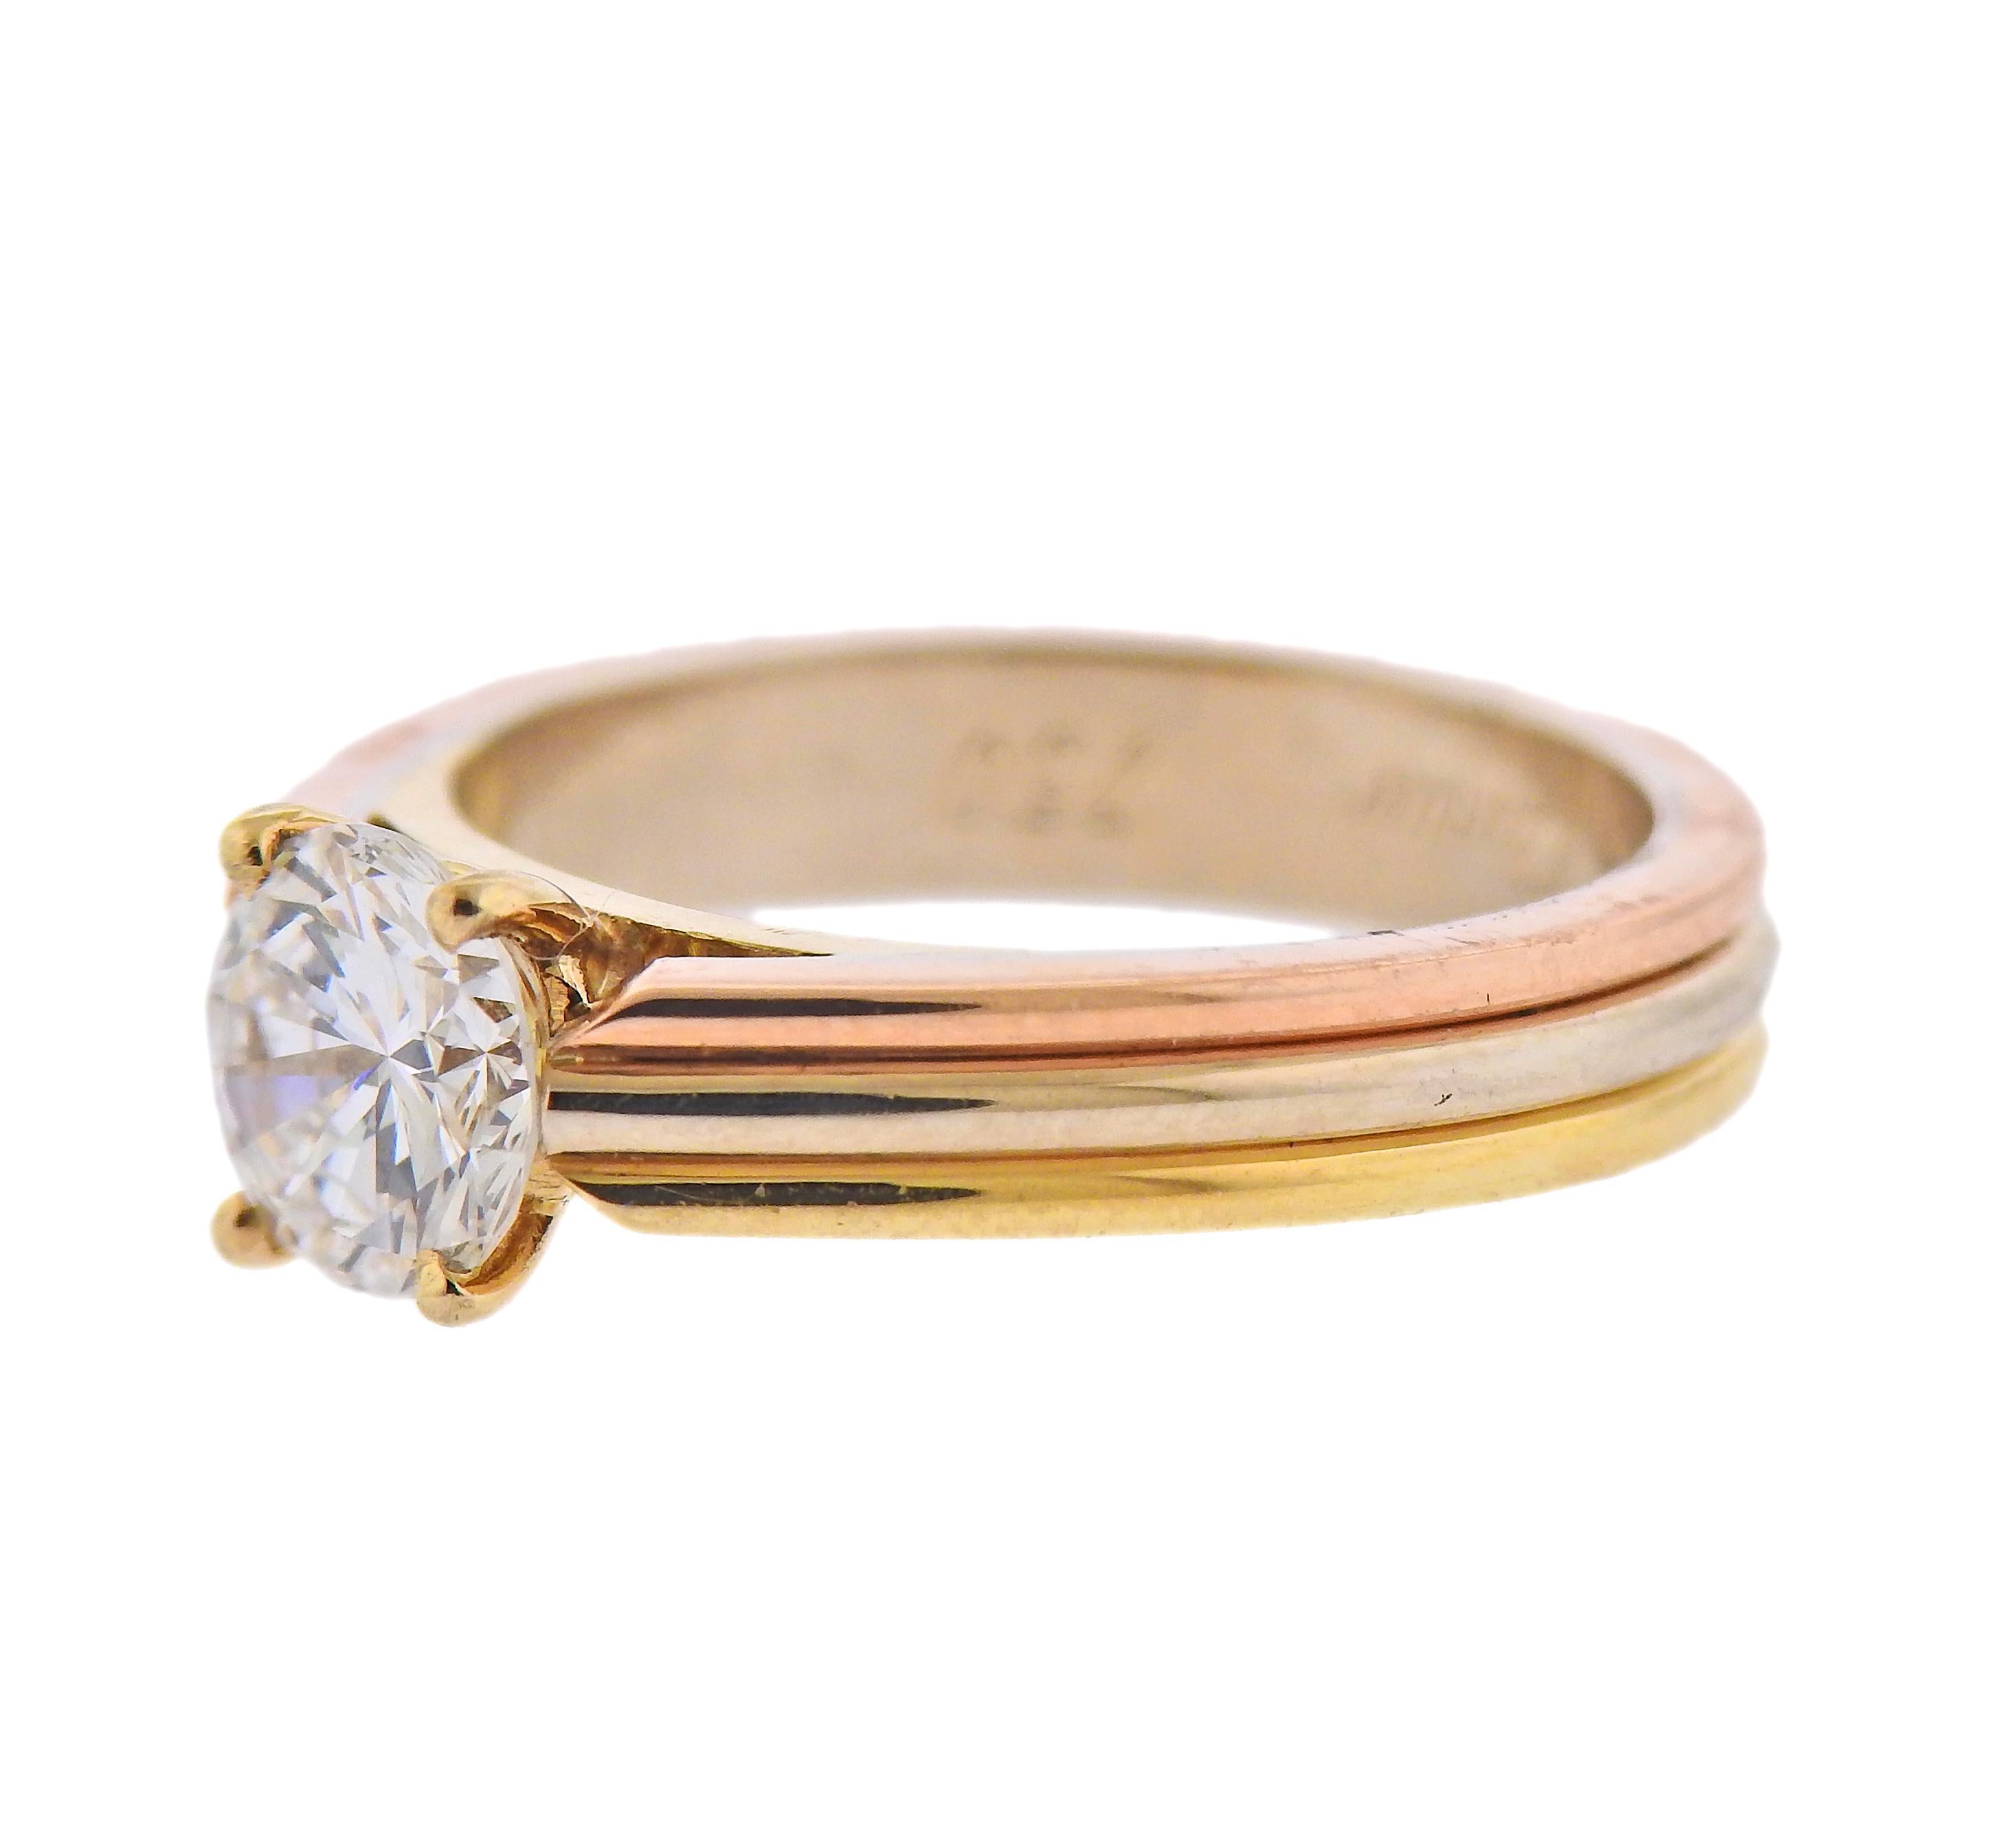 Cartier Trinity 18k tri color gold engagement ring with center GIA 0.91ct G/VVS2 diamond. Ring size 5.25. Marked: Cartier, 750. Weight - 5.5 grams. 